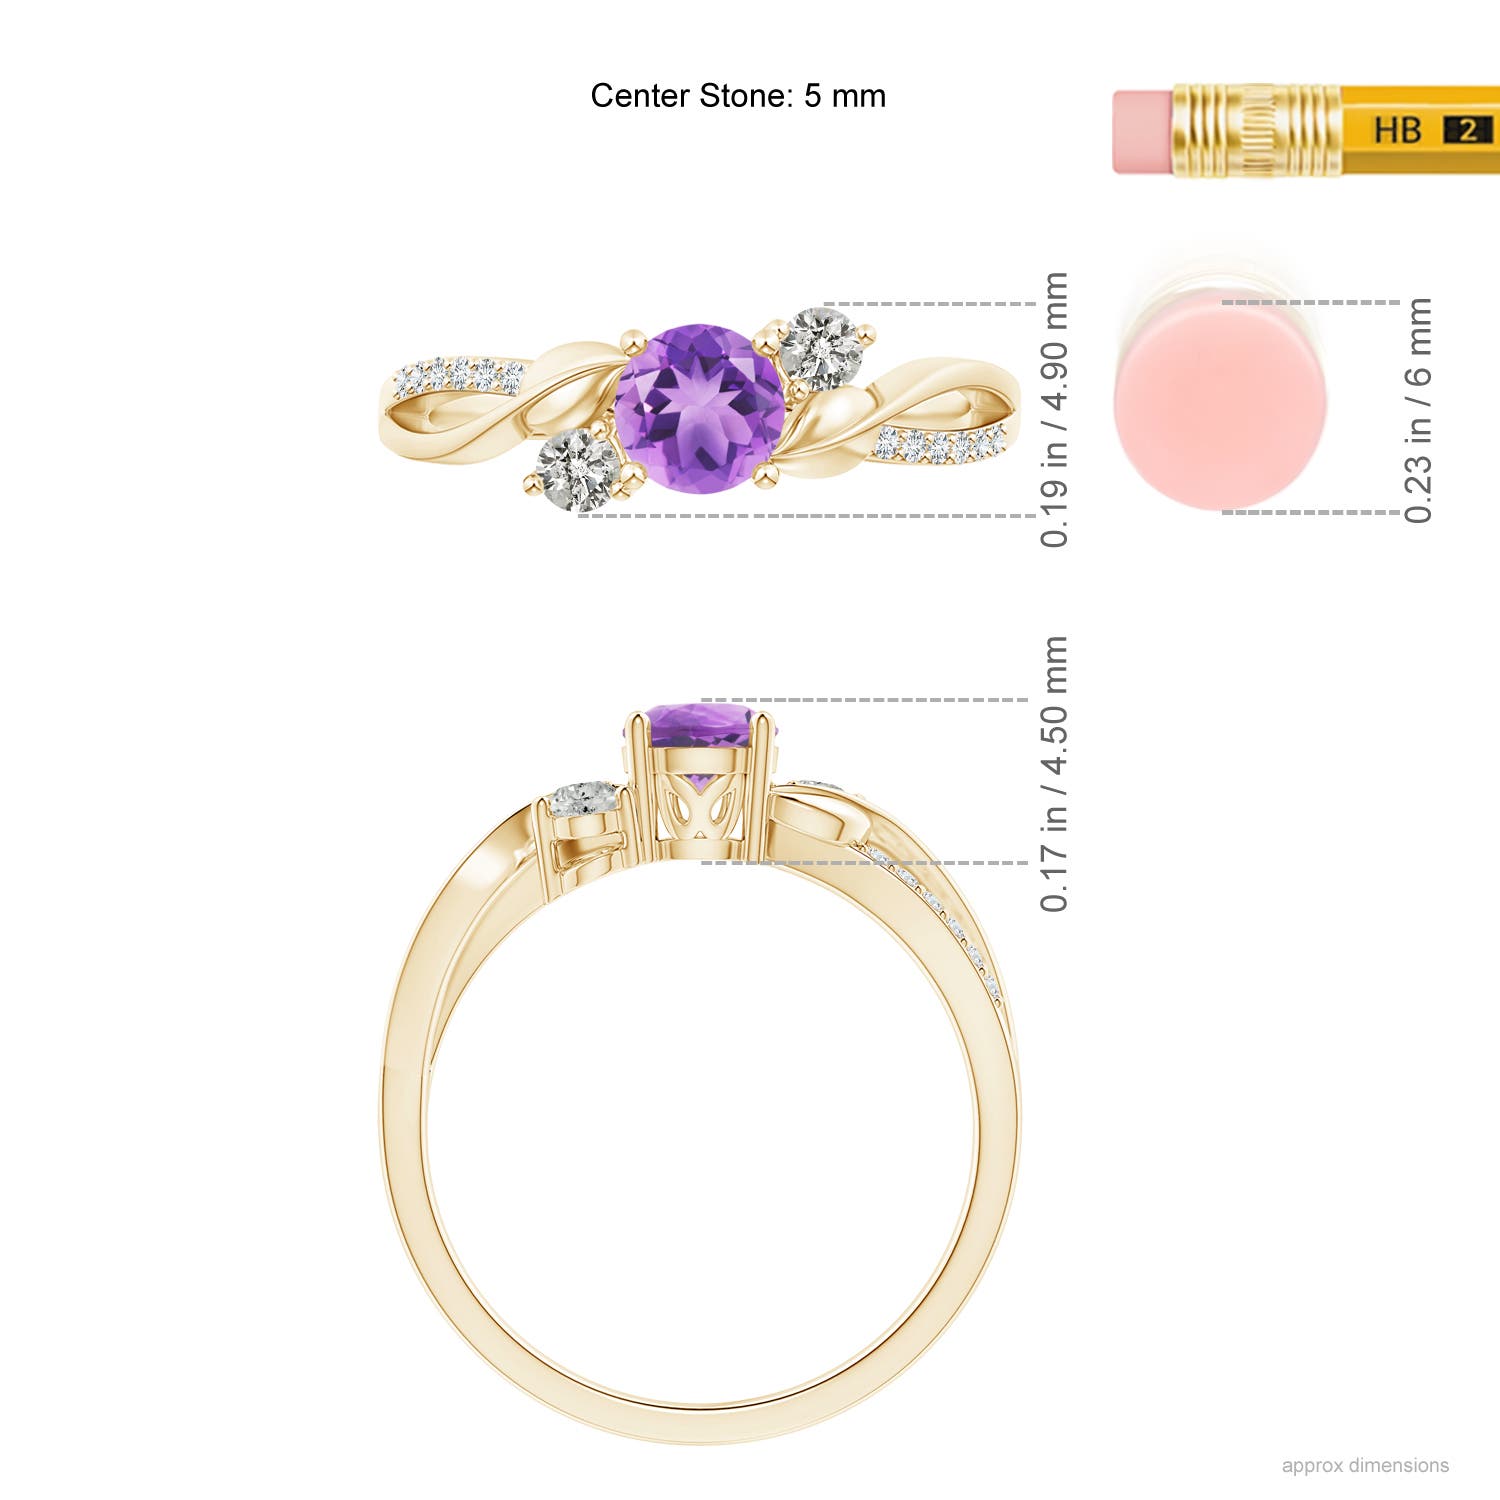 A - Amethyst / 0.65 CT / 14 KT Yellow Gold